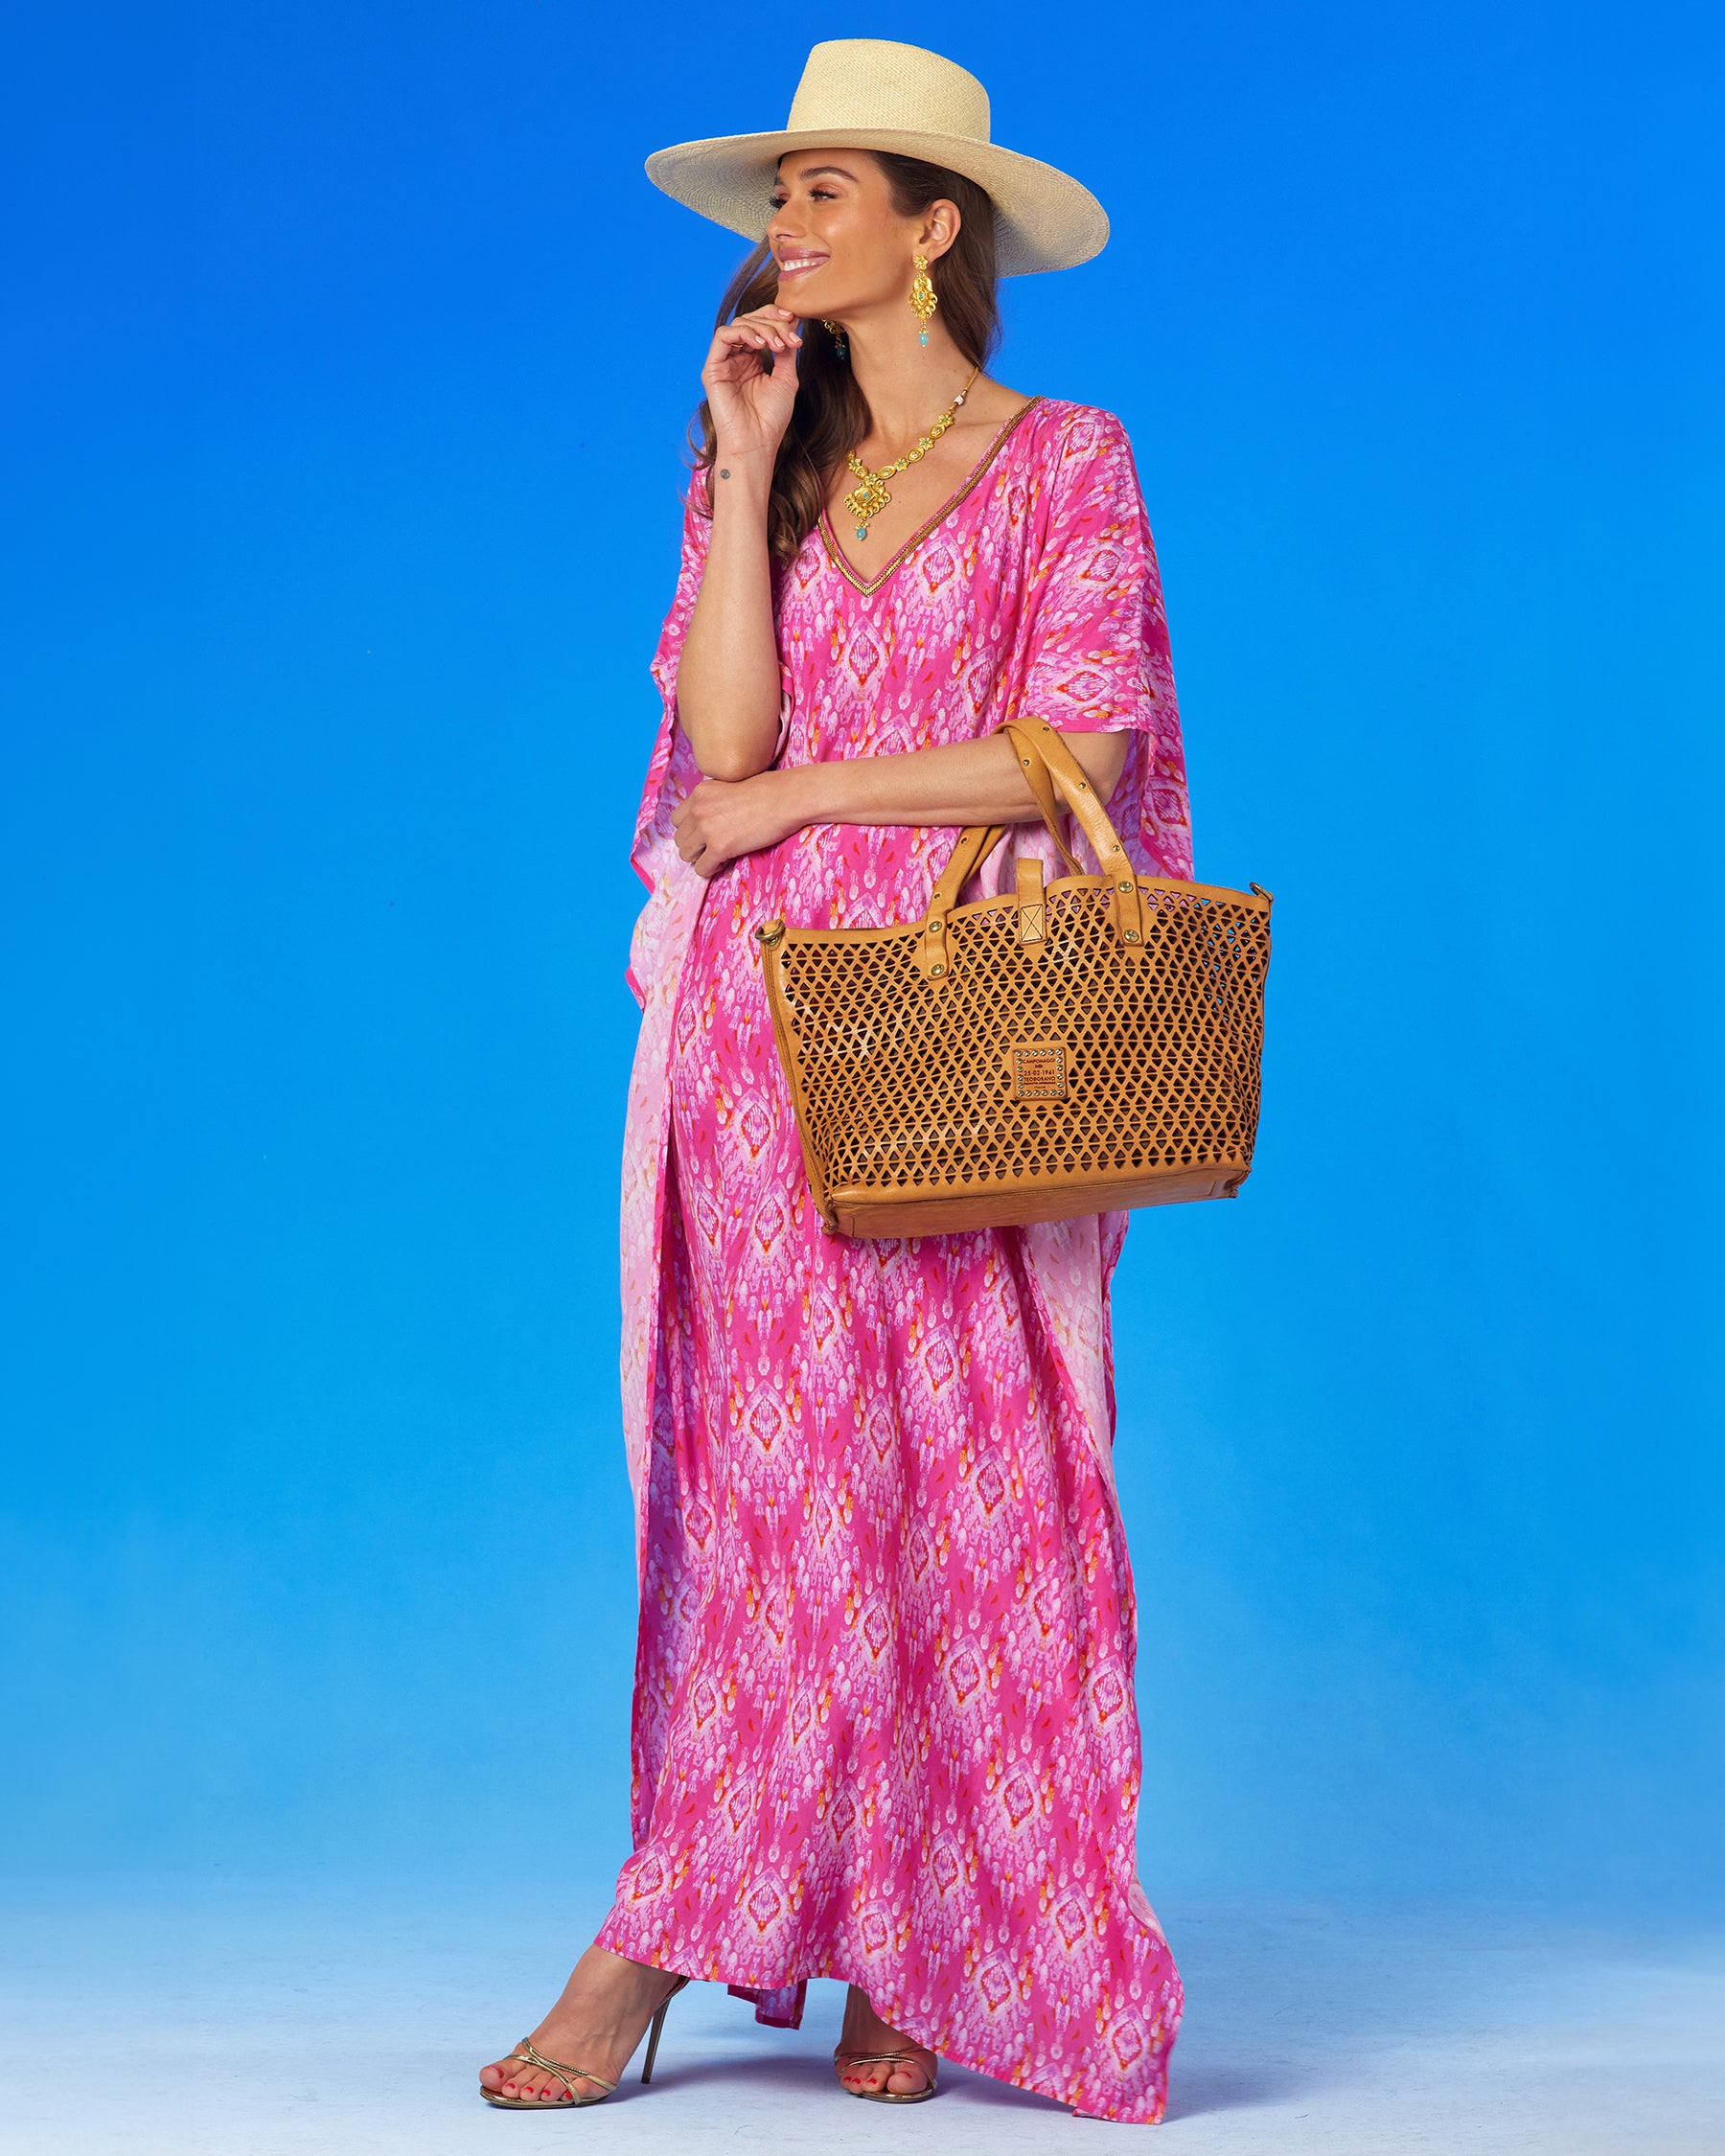 Orchidea Kaftan in Fuchsia Pink Ikat and Gold Beaded Trim with Campomaggi Malibu Pyramid Cut Tote Bag in Tanslung over the arm, full view